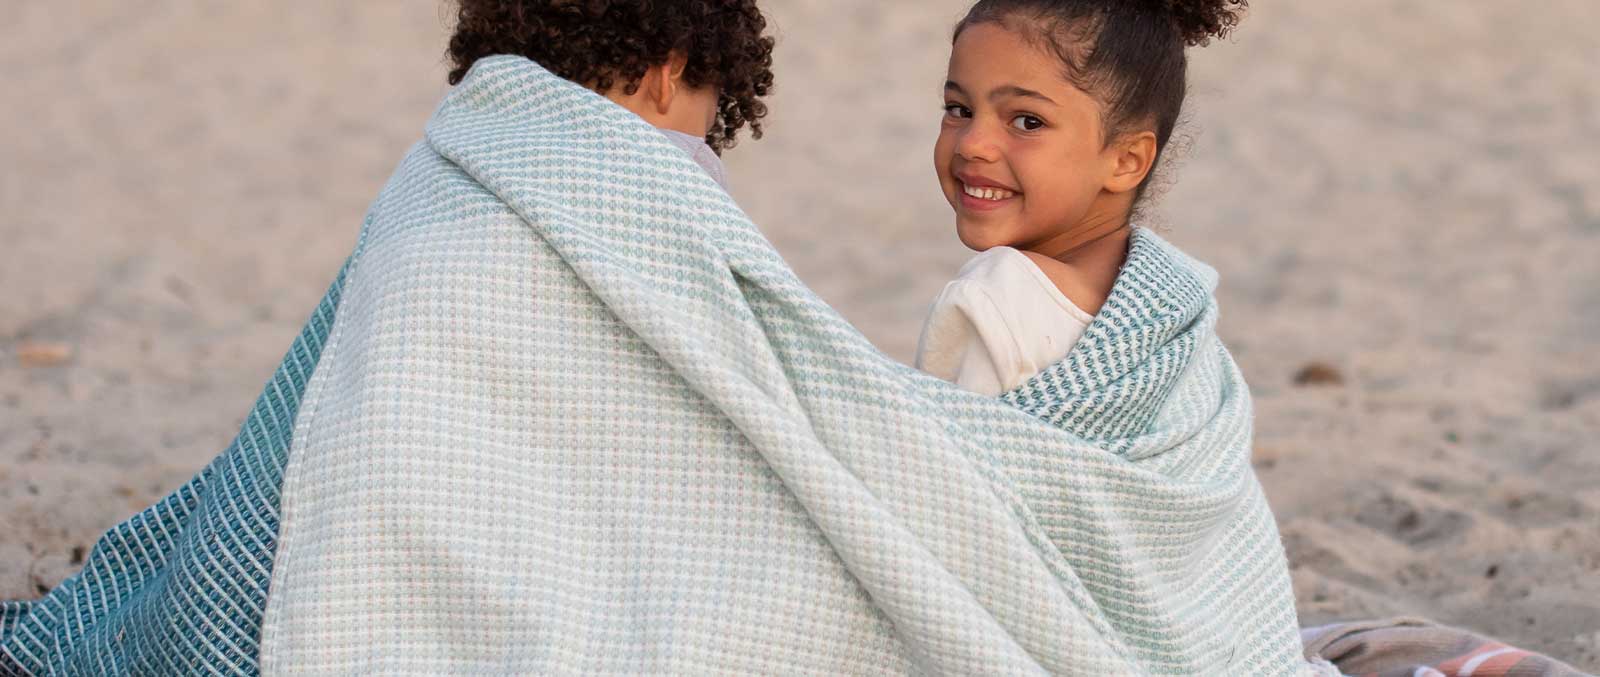 Hypoallergenic Blankets Traditionally Crafted in Africa